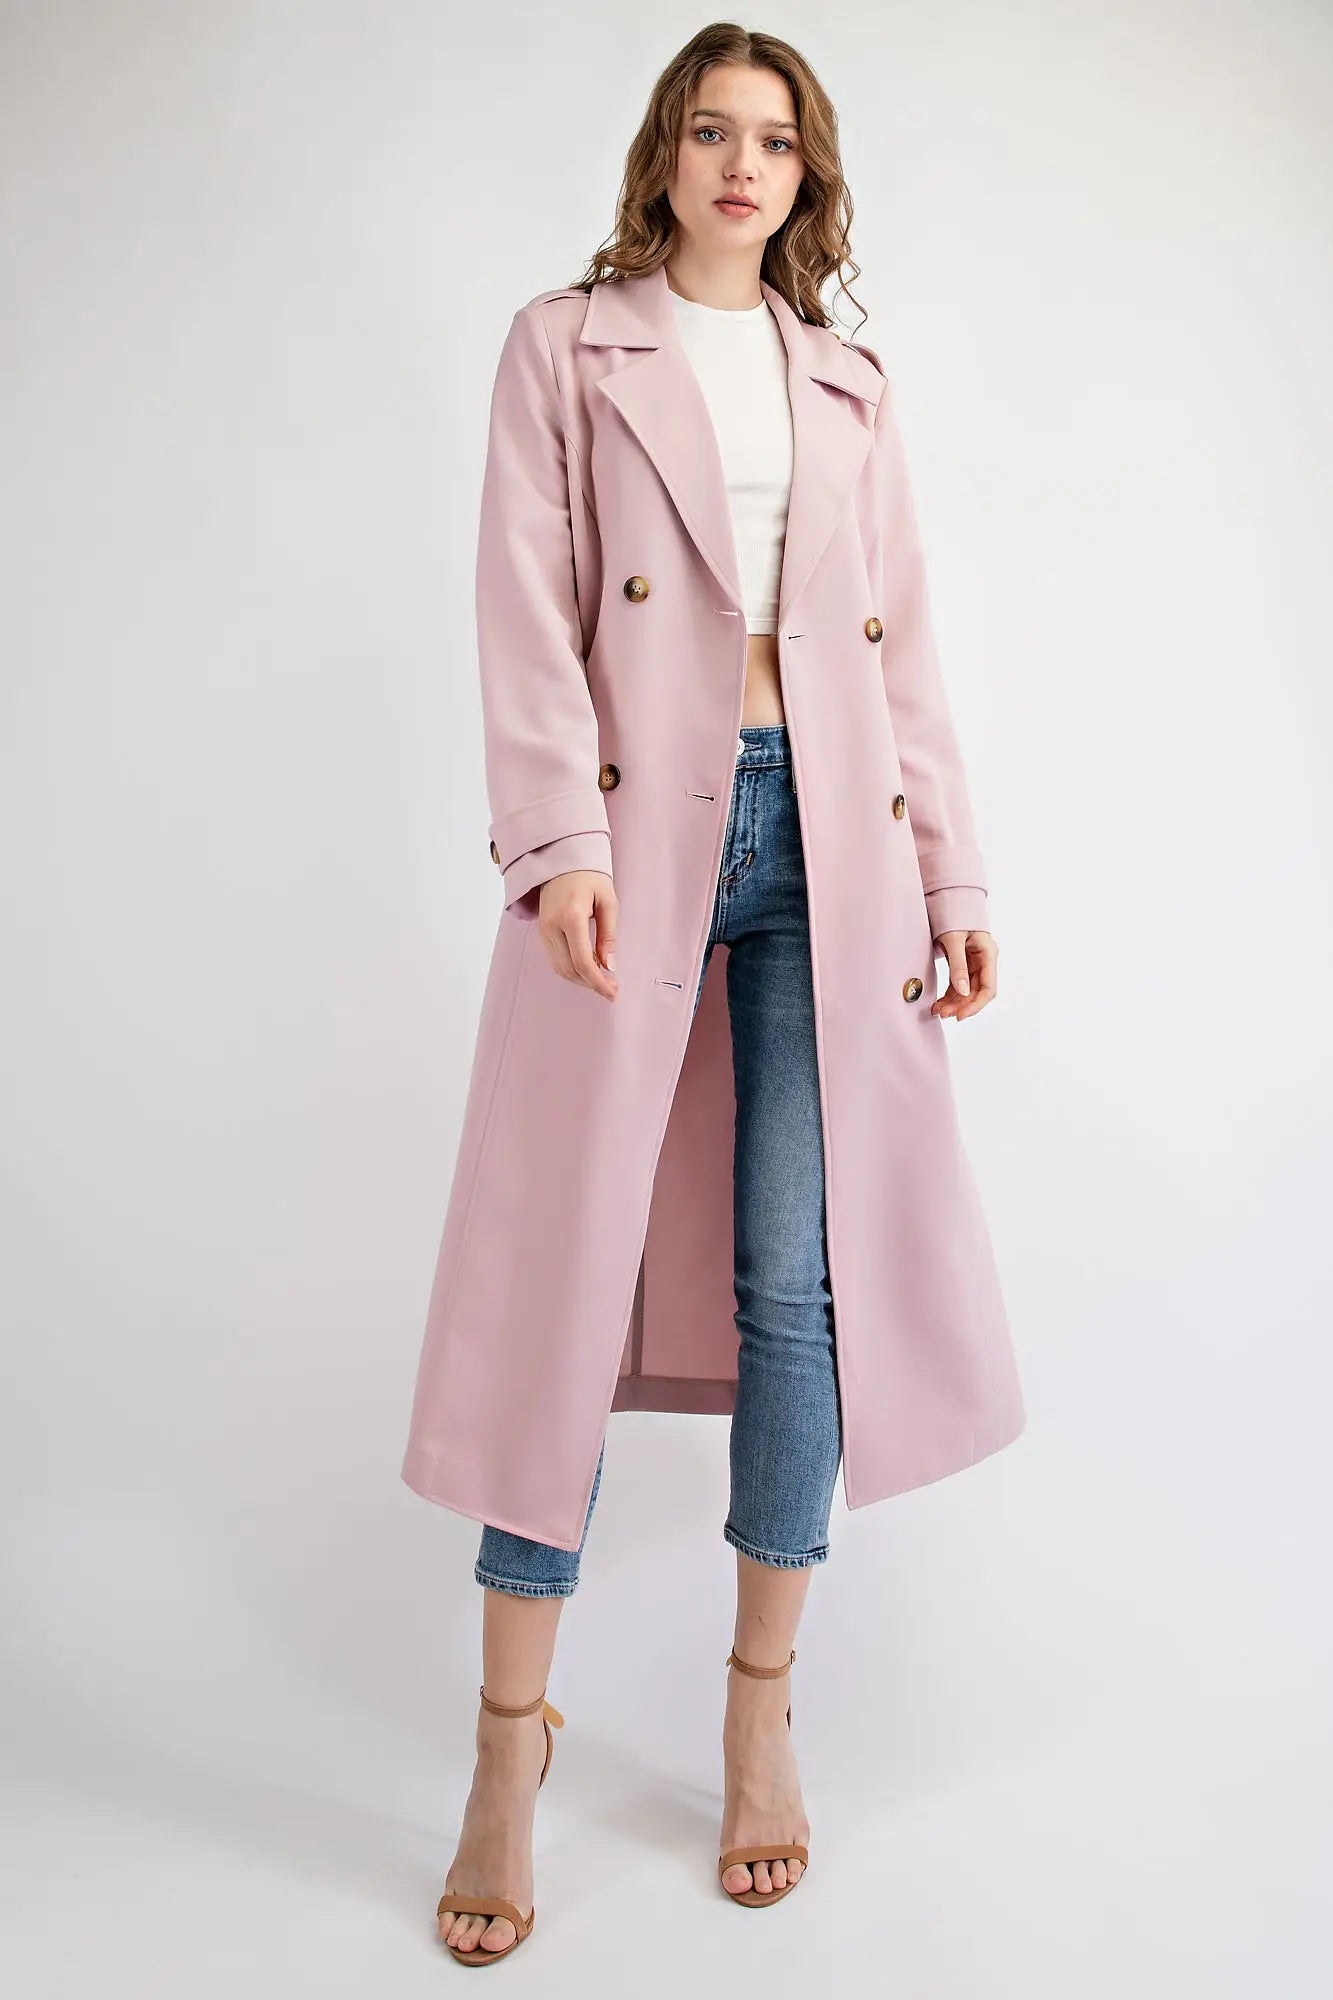 The double-breasted front features large buttons for a traditional look, while the notched lapel and belted waist add to the elegant silhouette. The coat has two side pockets for added convenience and a back vent for ease of movement.